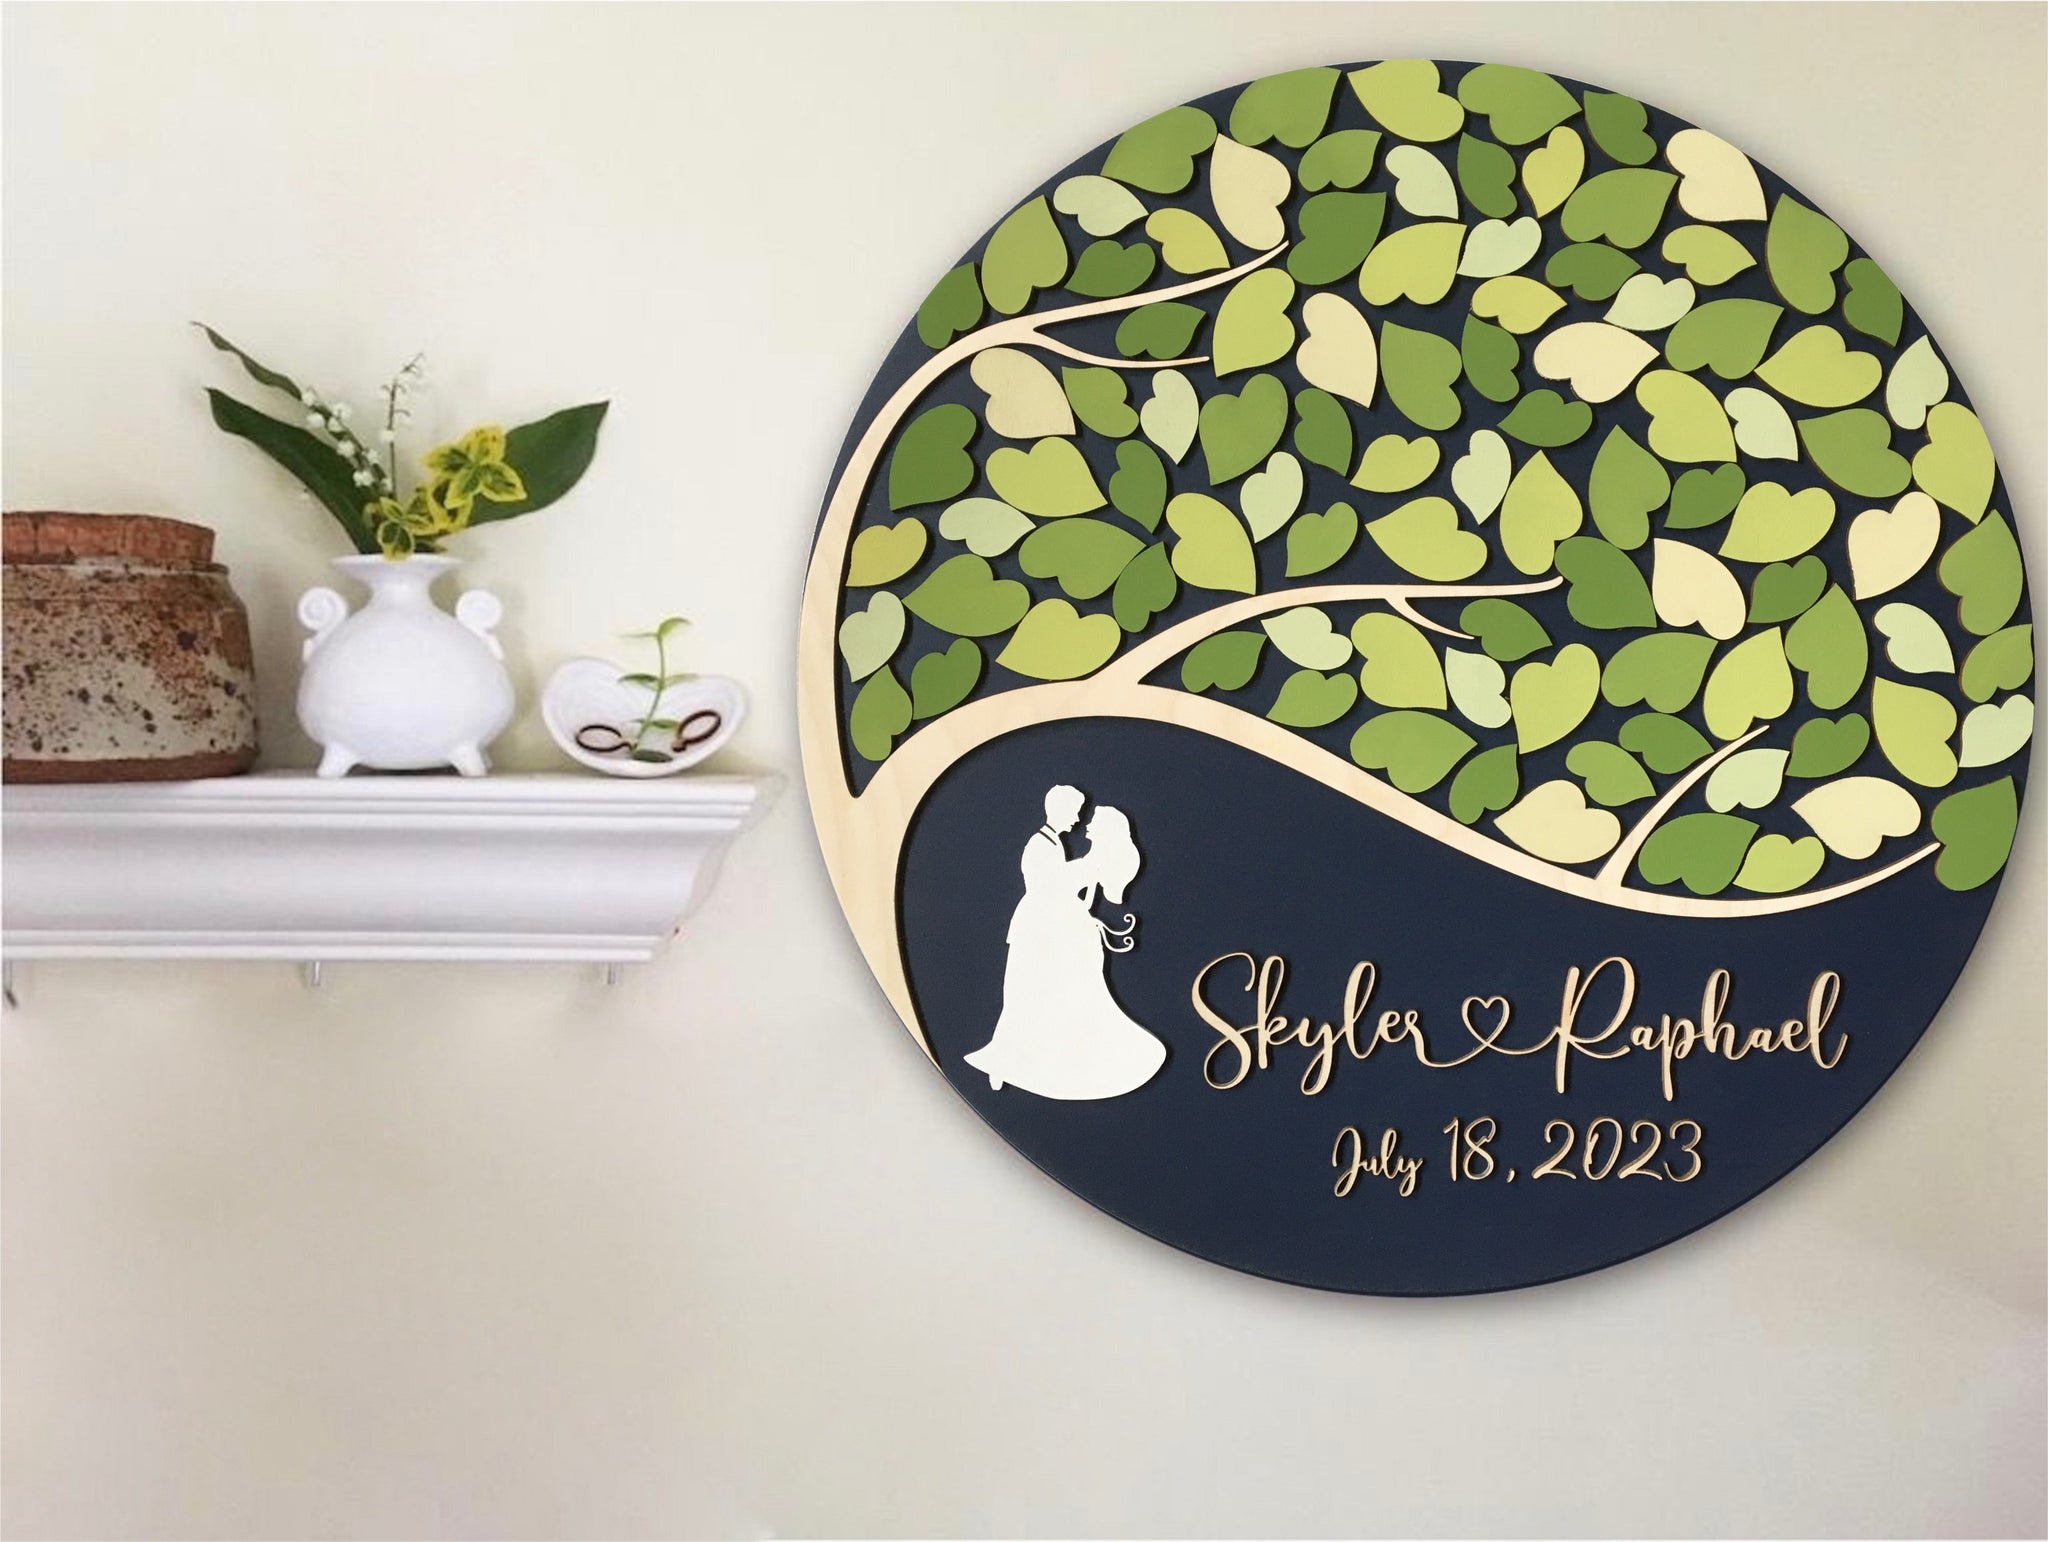 Tree of life guest book round wedding guestbook alternative with couple, personalized guest book with fresh green shades